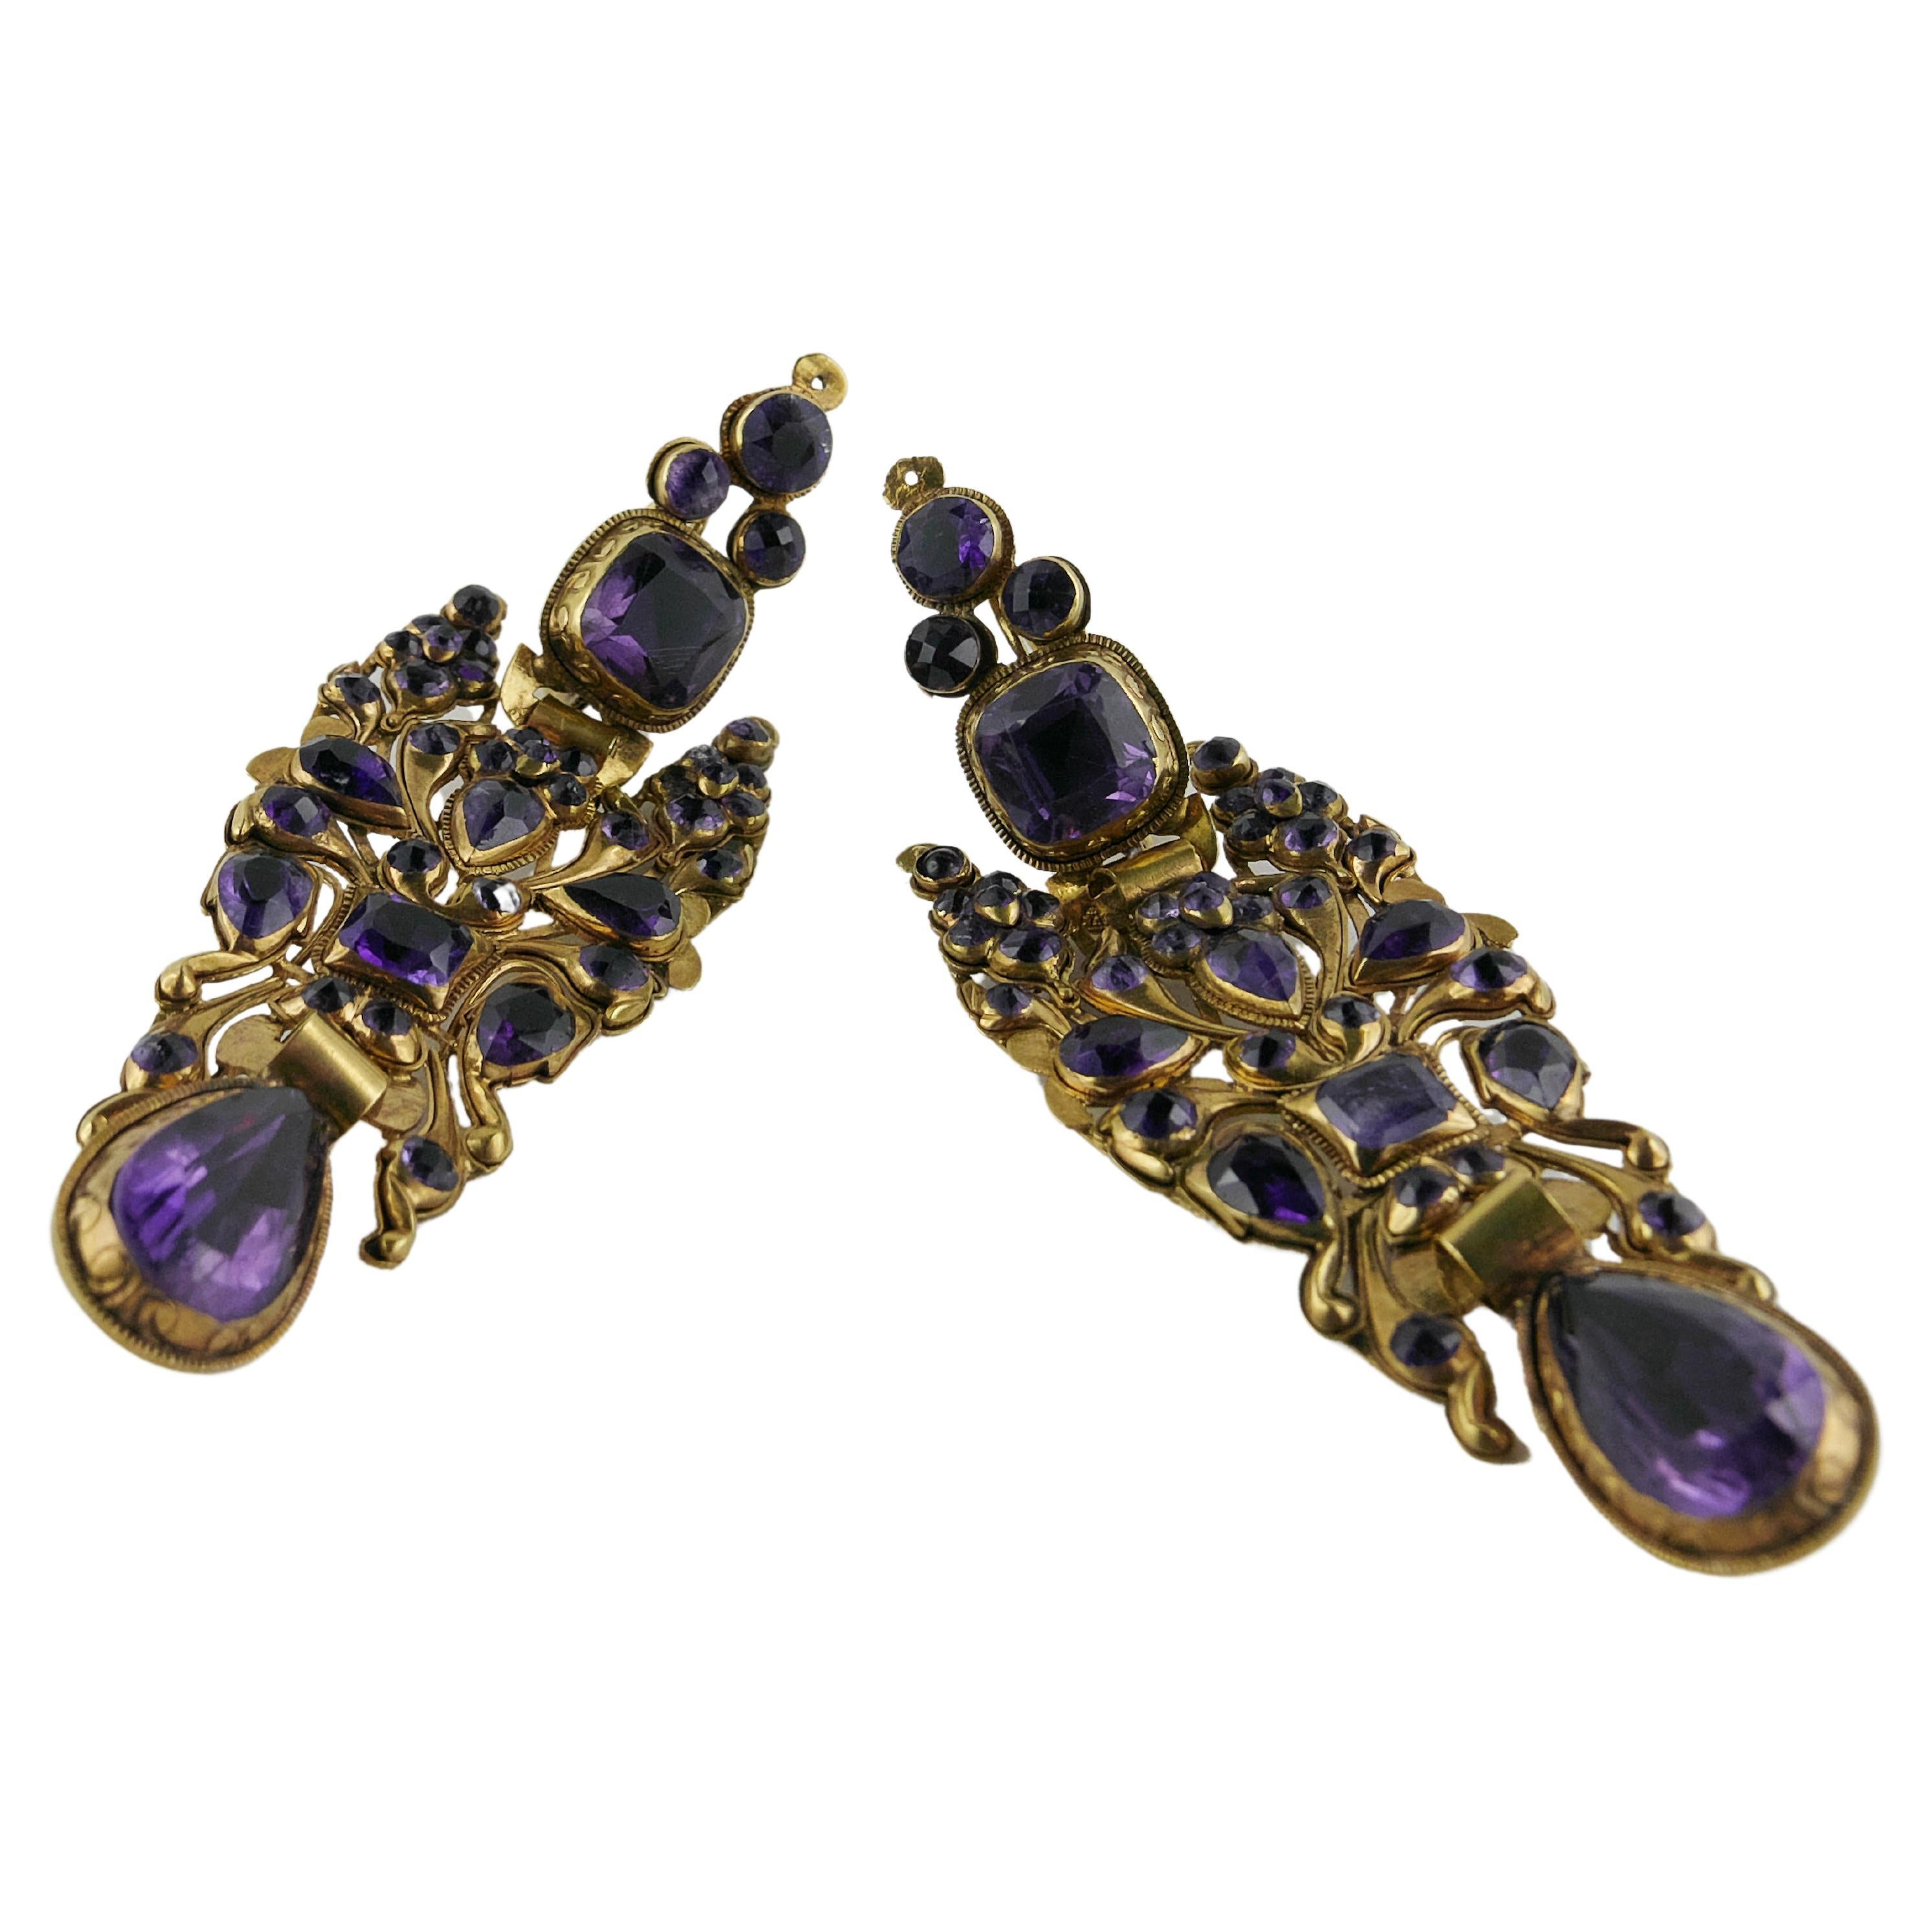 Late 18th Century Catalan Gold and Amethyst Pendant Earrings